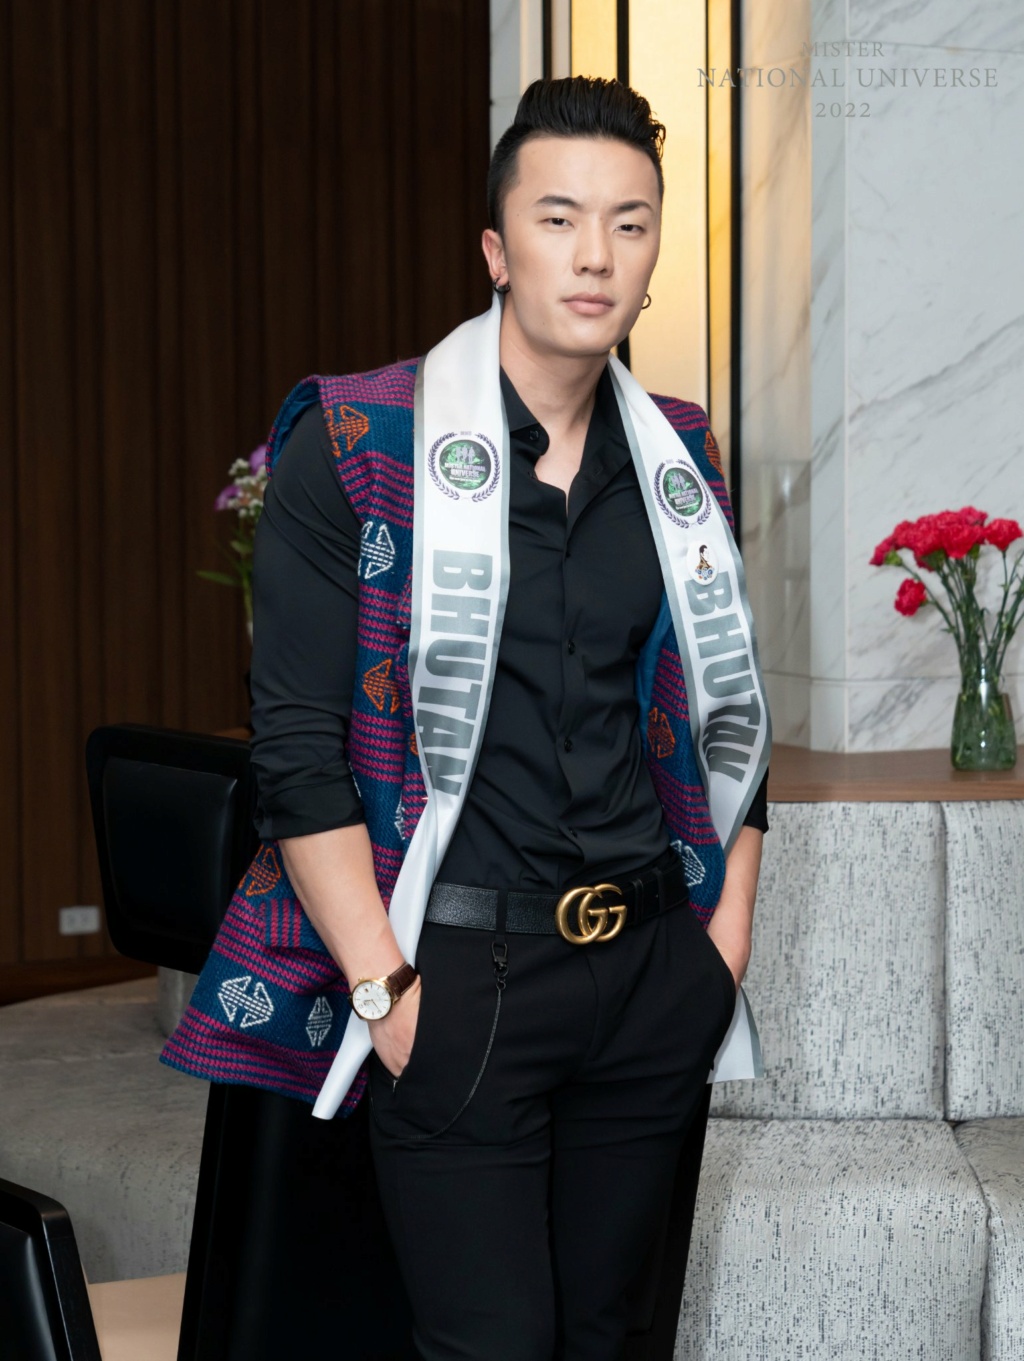 Mister National Universe 2022 is Việt Hoàng from Vietnam 28506110